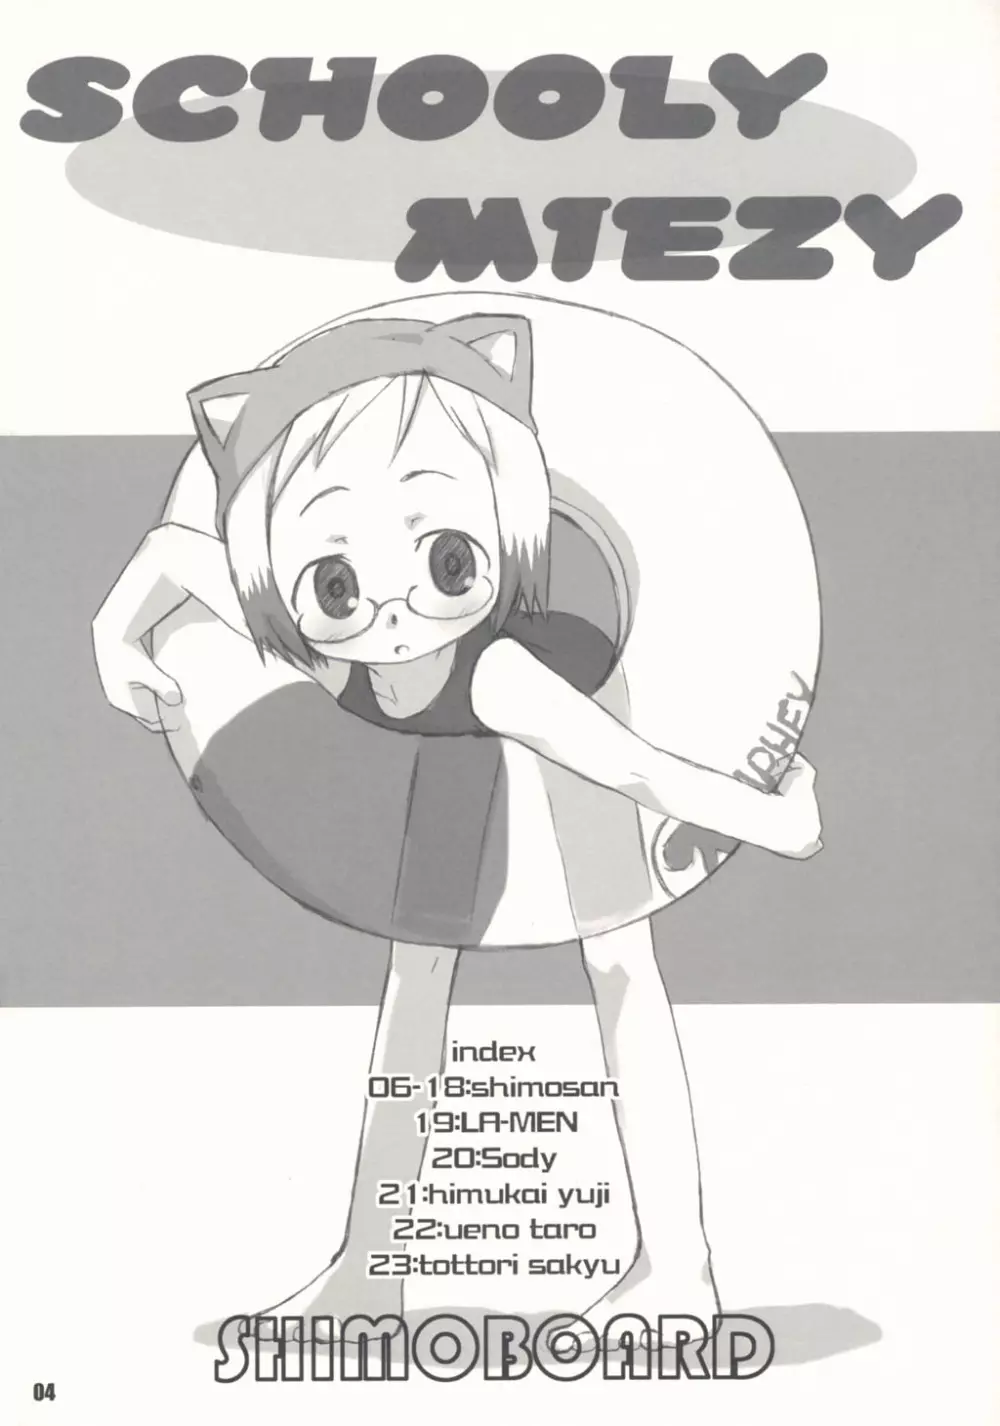 SCHOOLY MIEZY 完全版 - page3